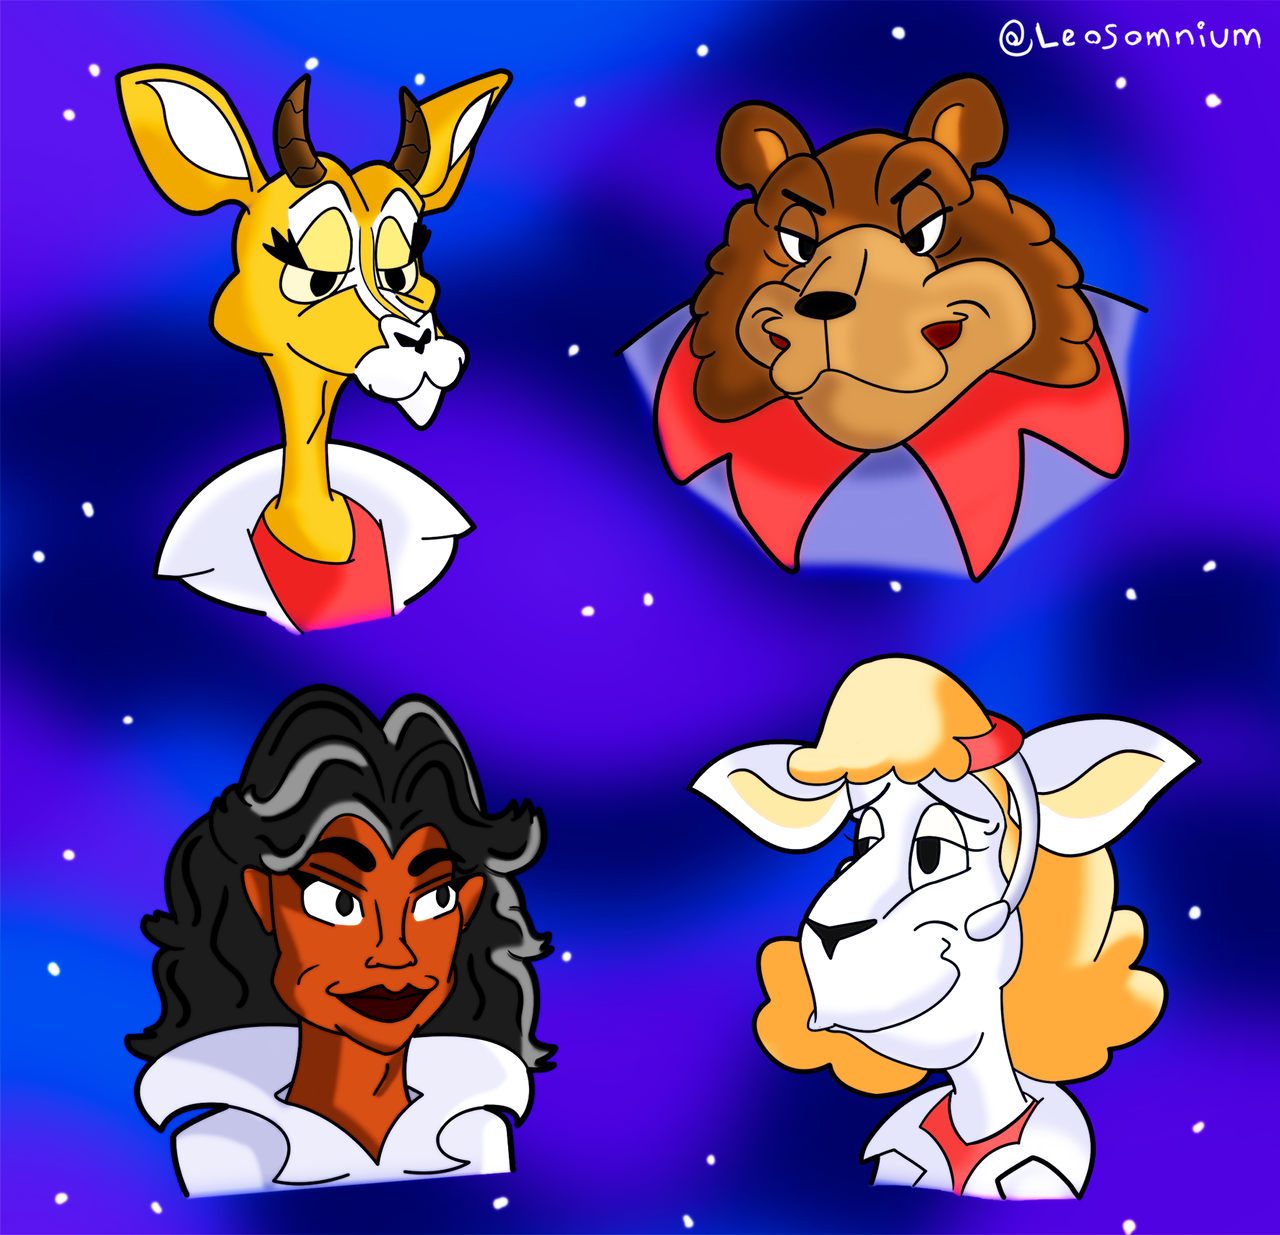 How Did The The Names And Characters For Star Fox Come To Be? - Siliconera